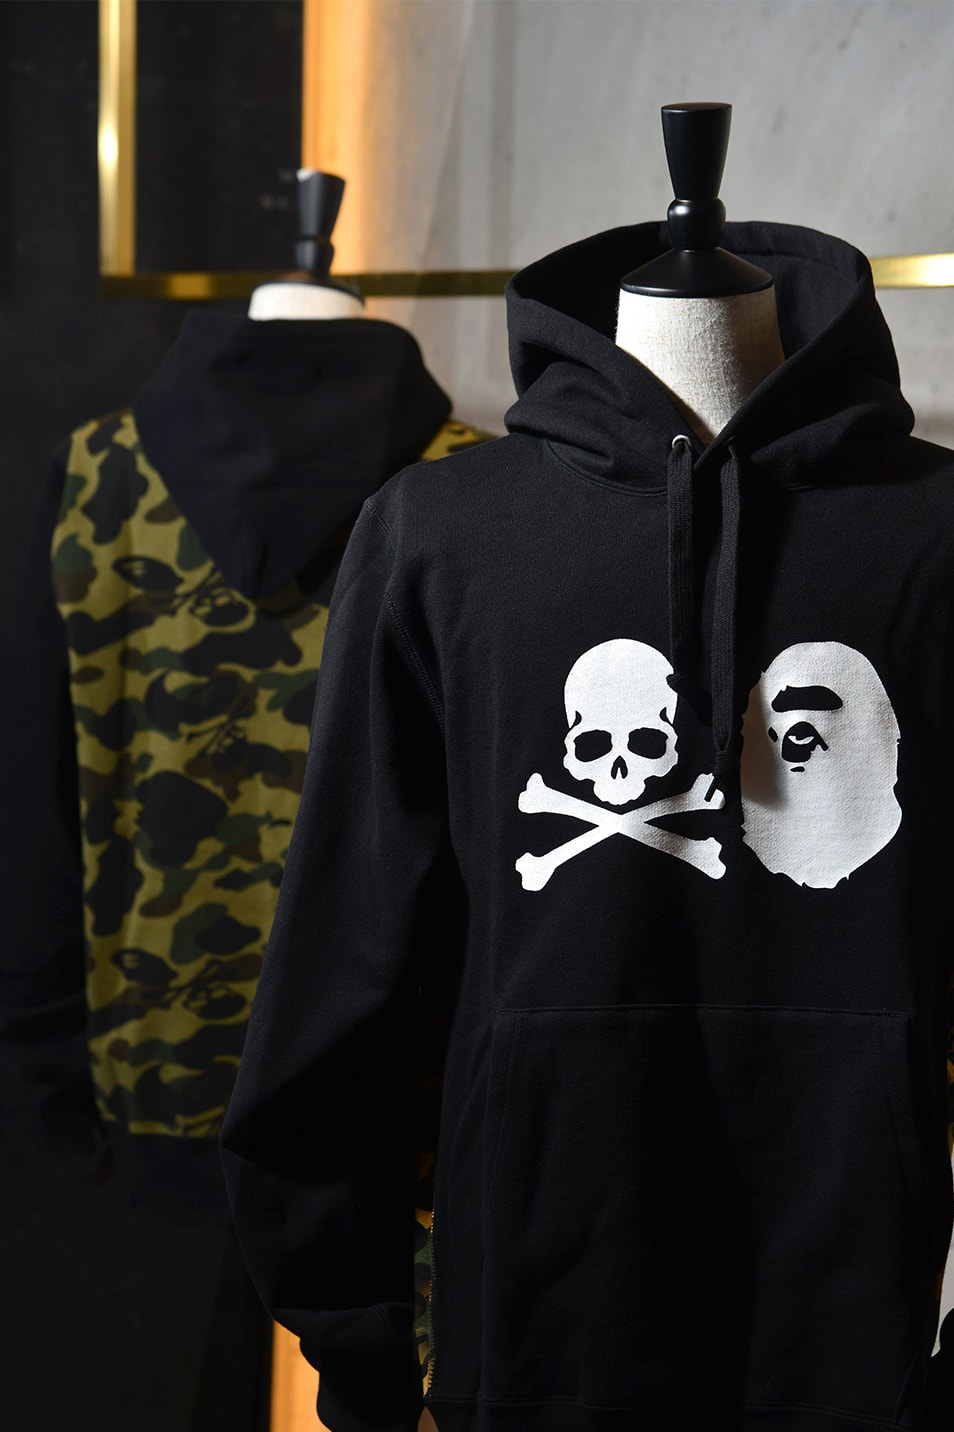 mastermind vs A BATHING APE SS20 New Items